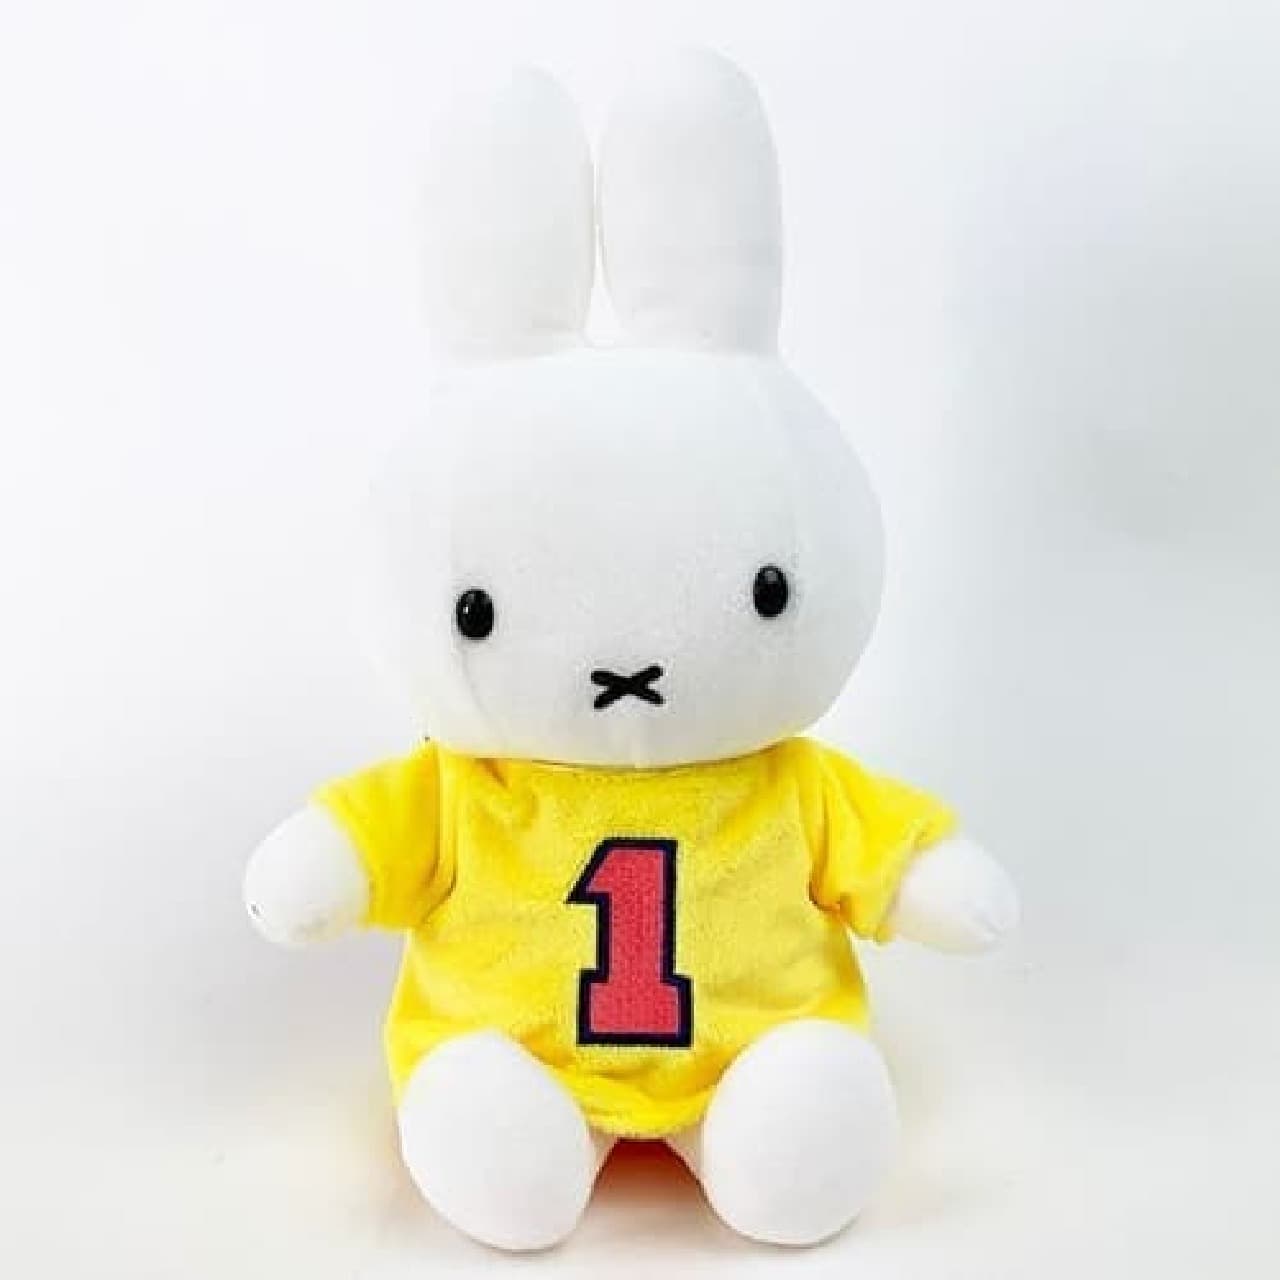 Miffy squeezes milk ♪ A fluffy stuffed animal that feels soft to the touch